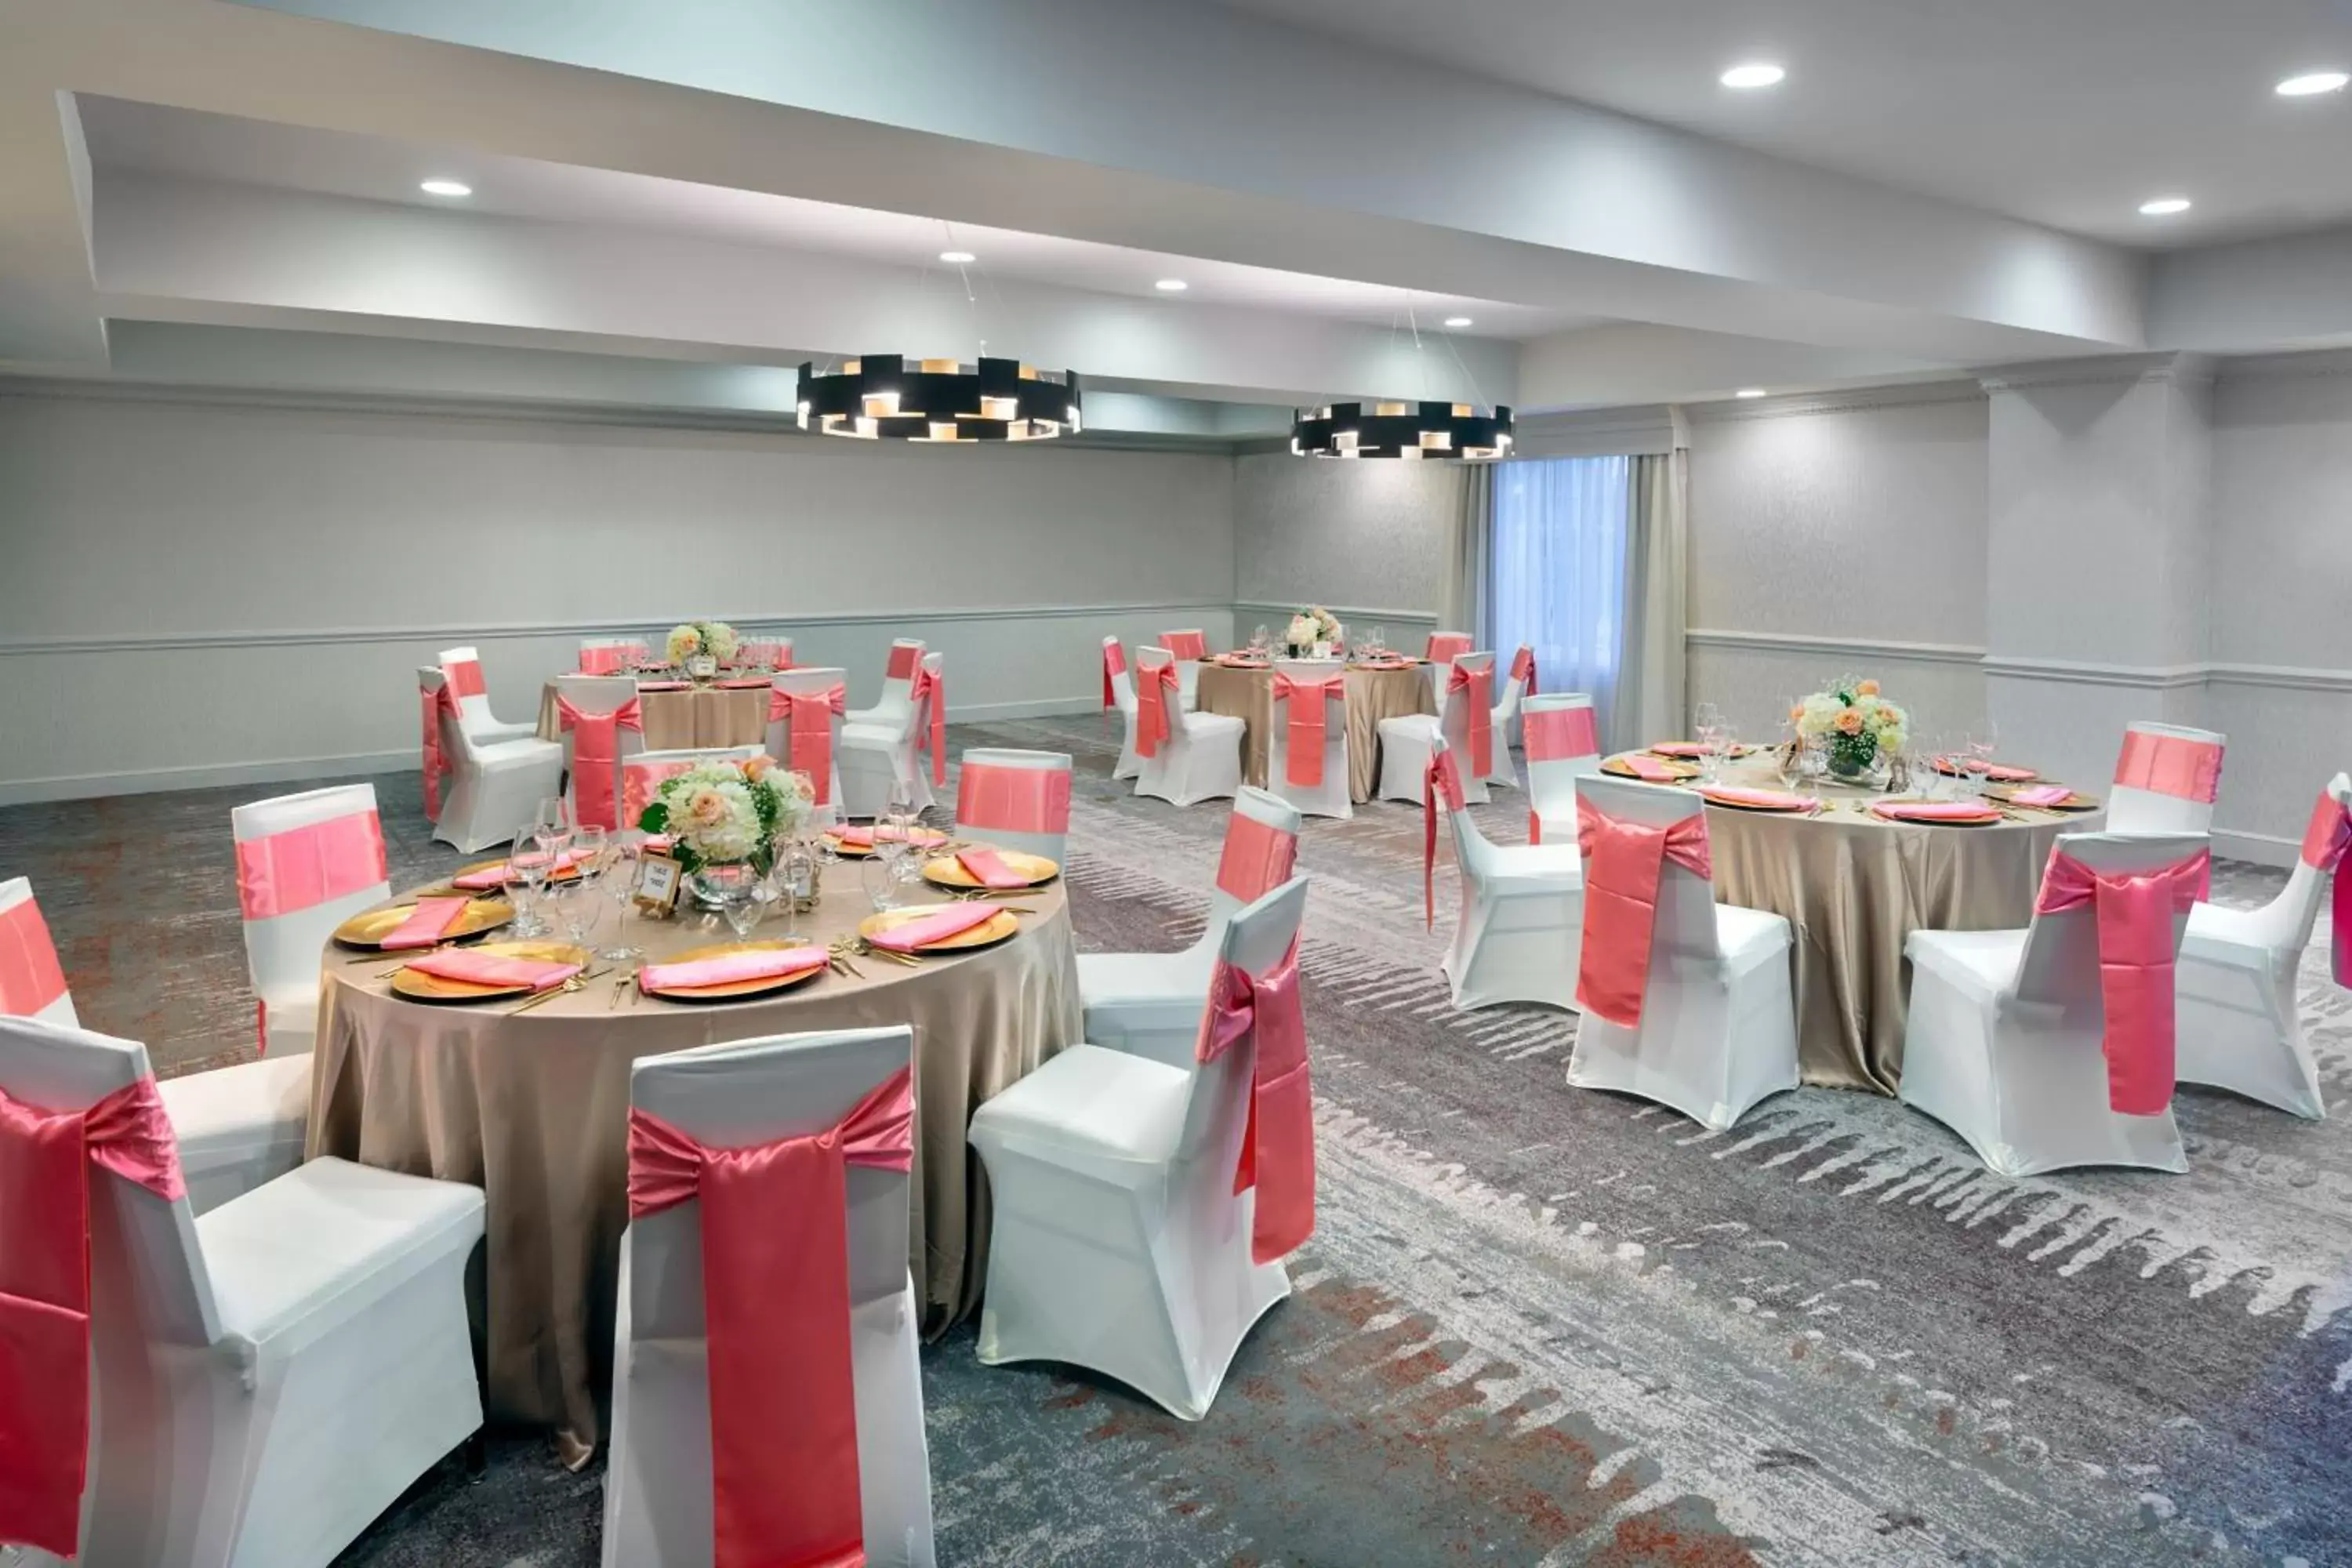 Meeting/conference room, Banquet Facilities in Courtyard by Marriott Sarasota at University Town Center